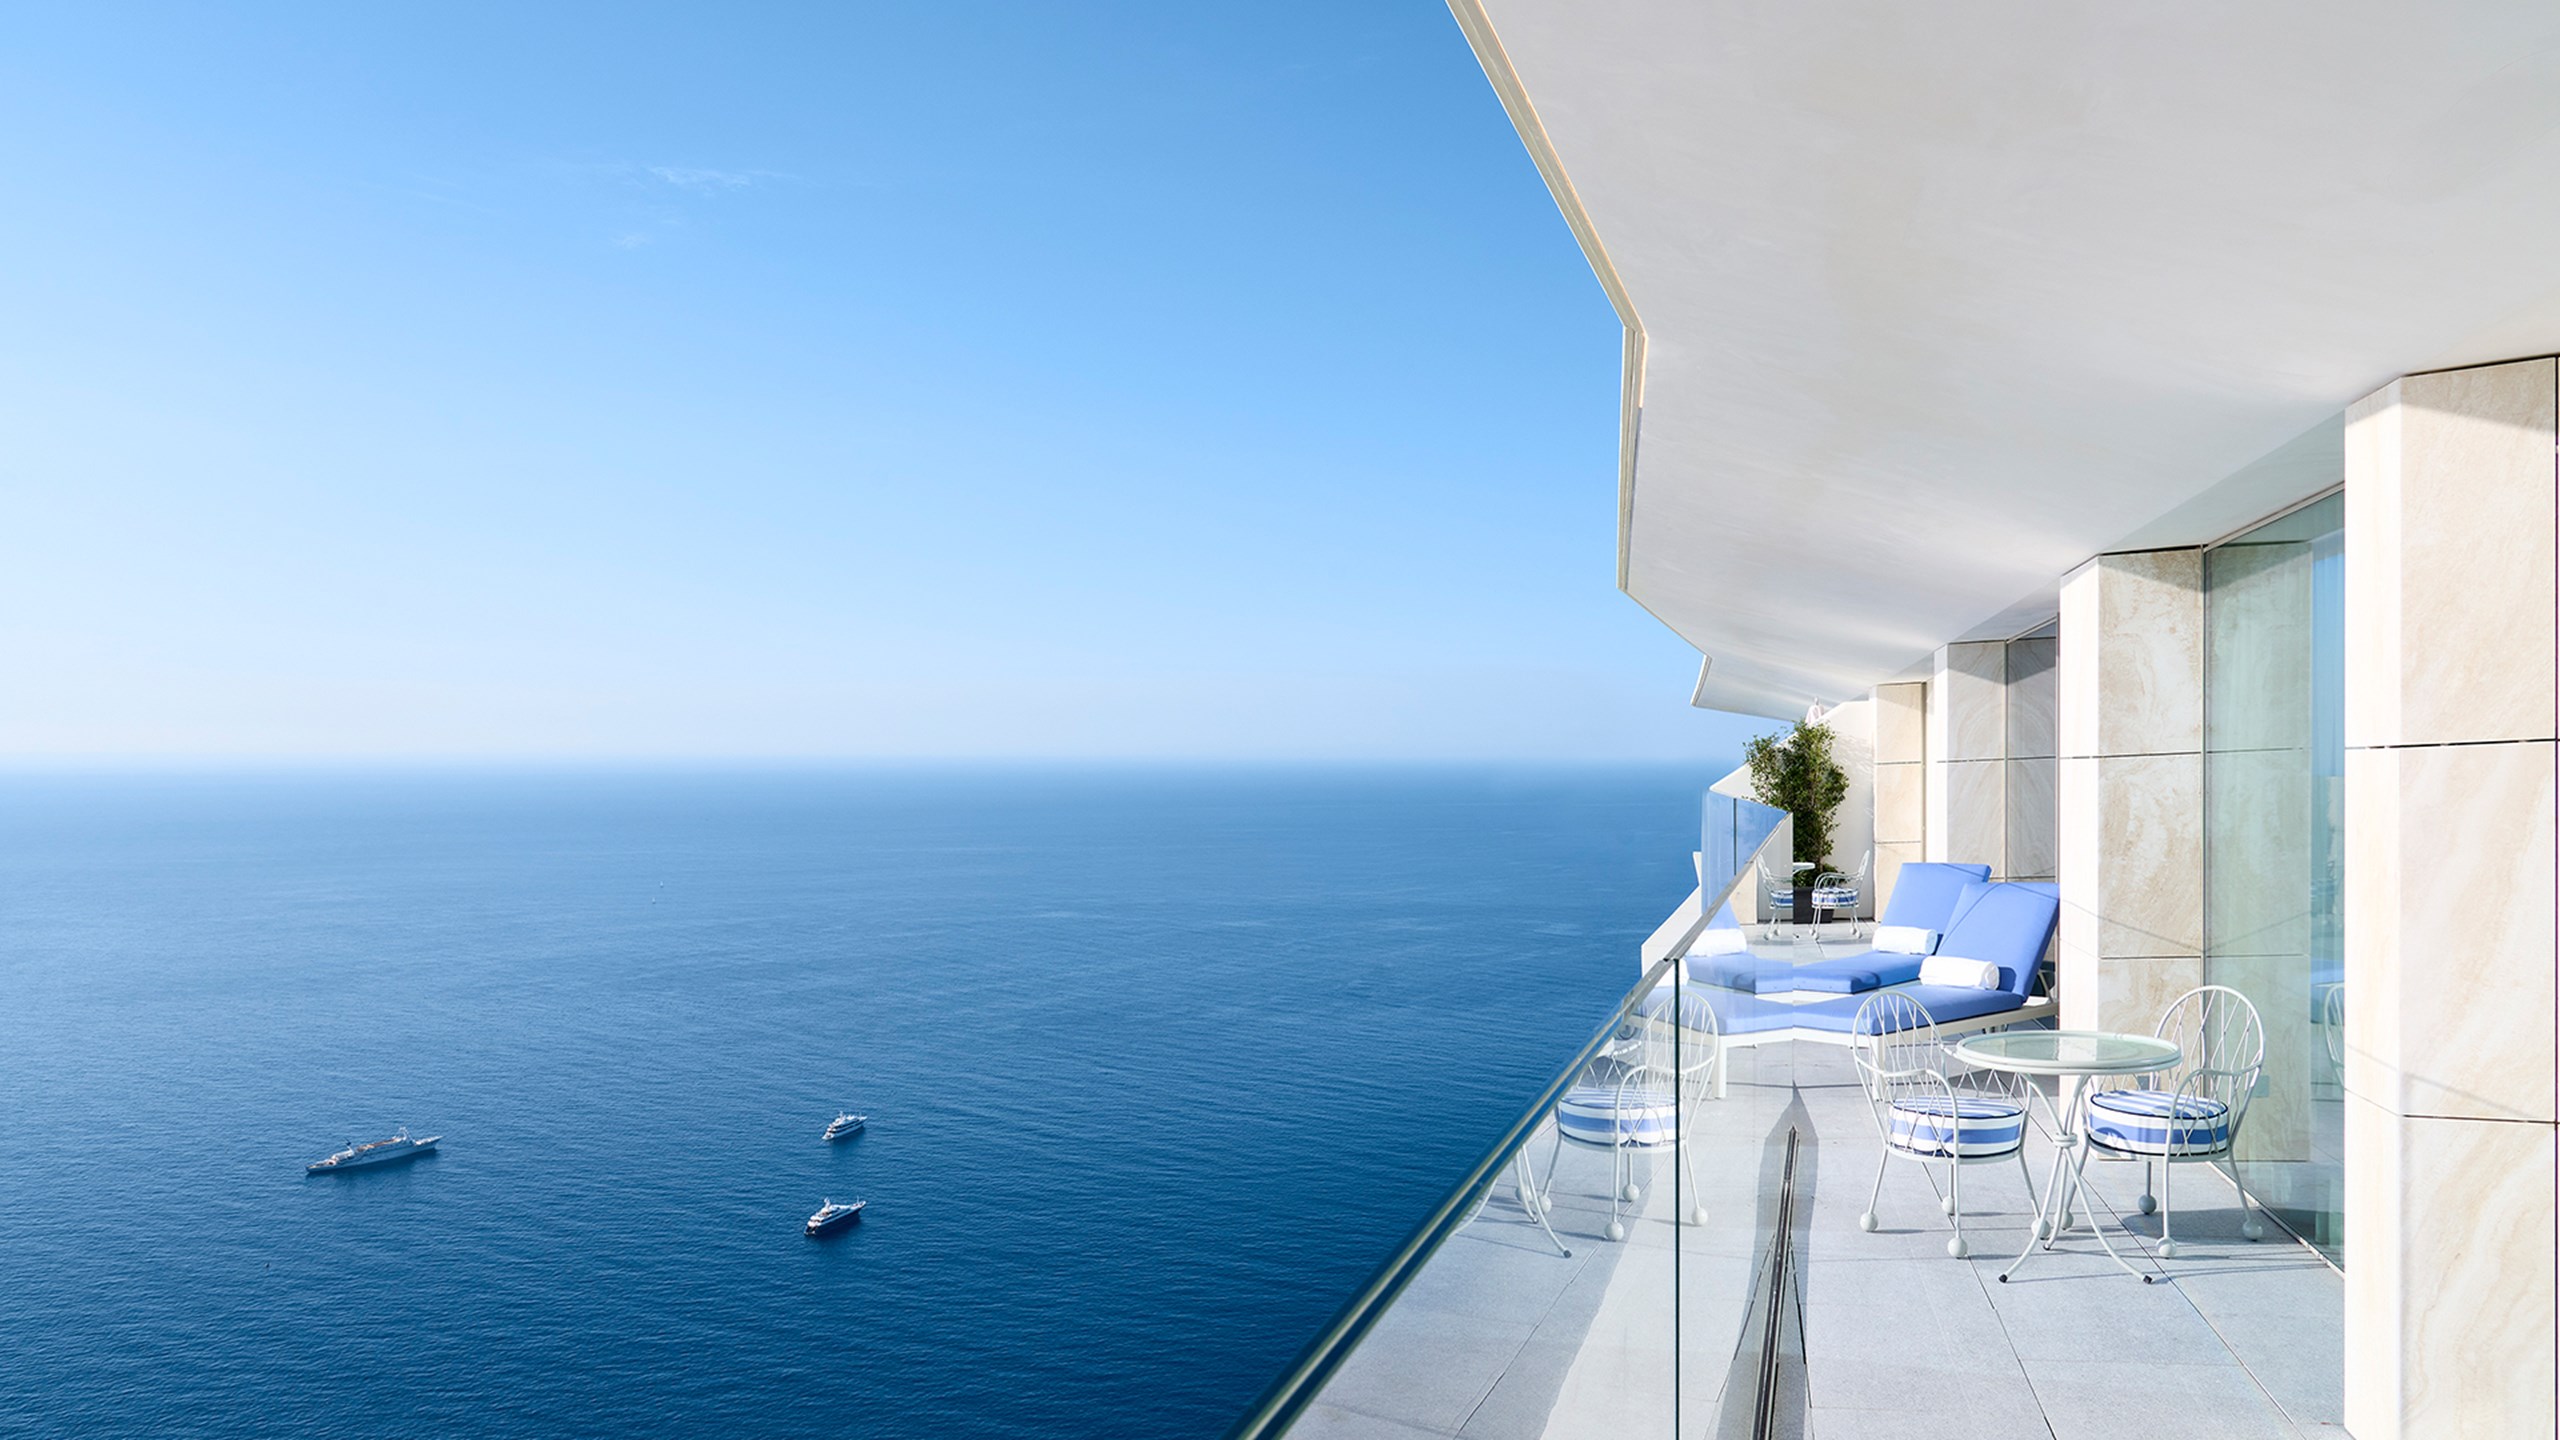 A terrace with two sun loungers, a table and the infinite sea.